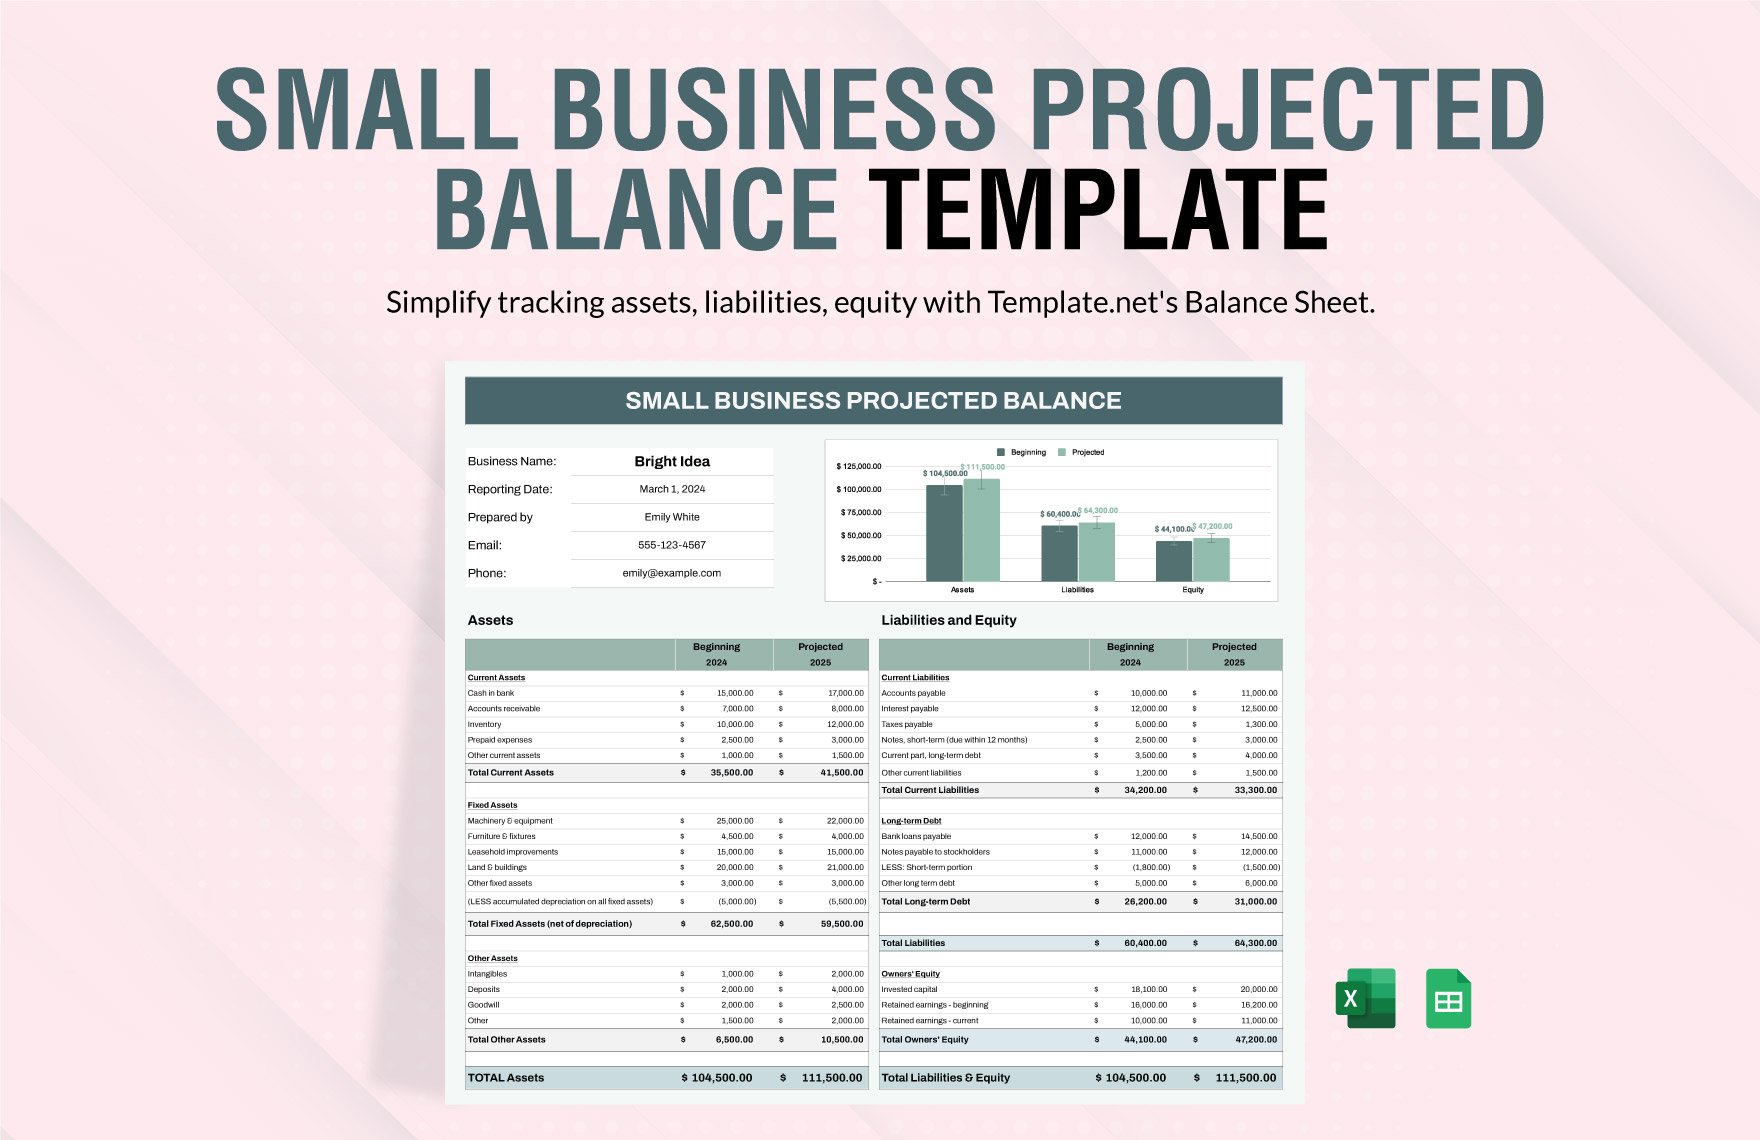 Small Business Projected Balance Template in Excel, Google Sheets